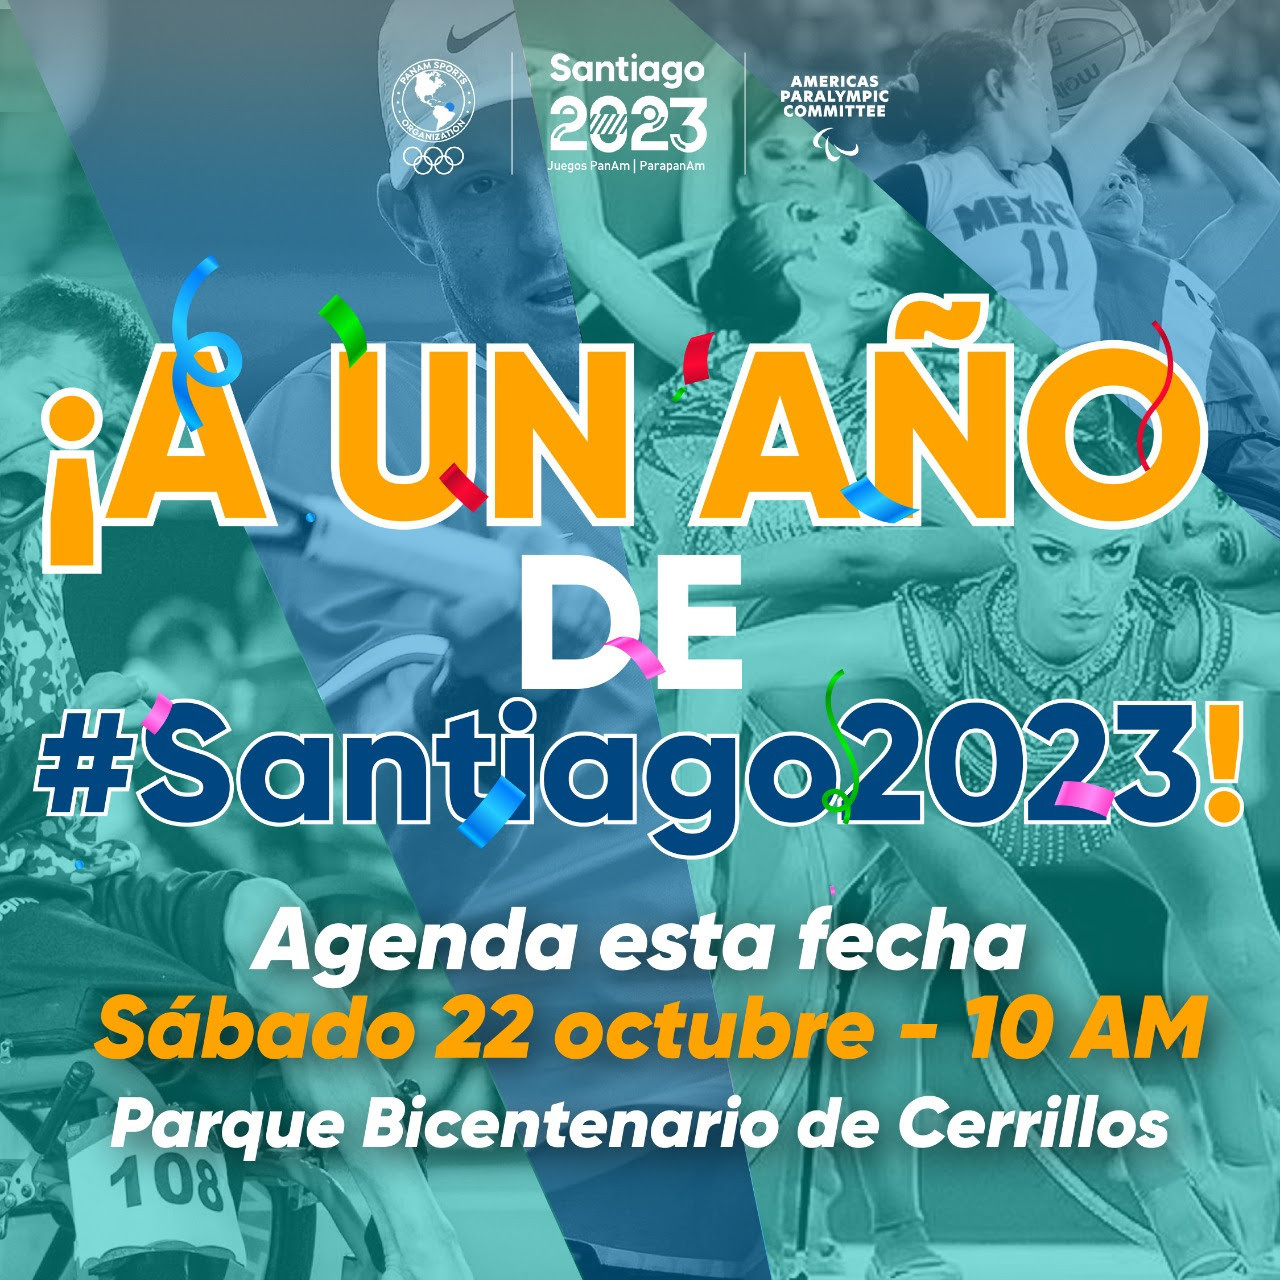 Santiago 2023 unveils countdown clock to celebrate one year until Pan American Games